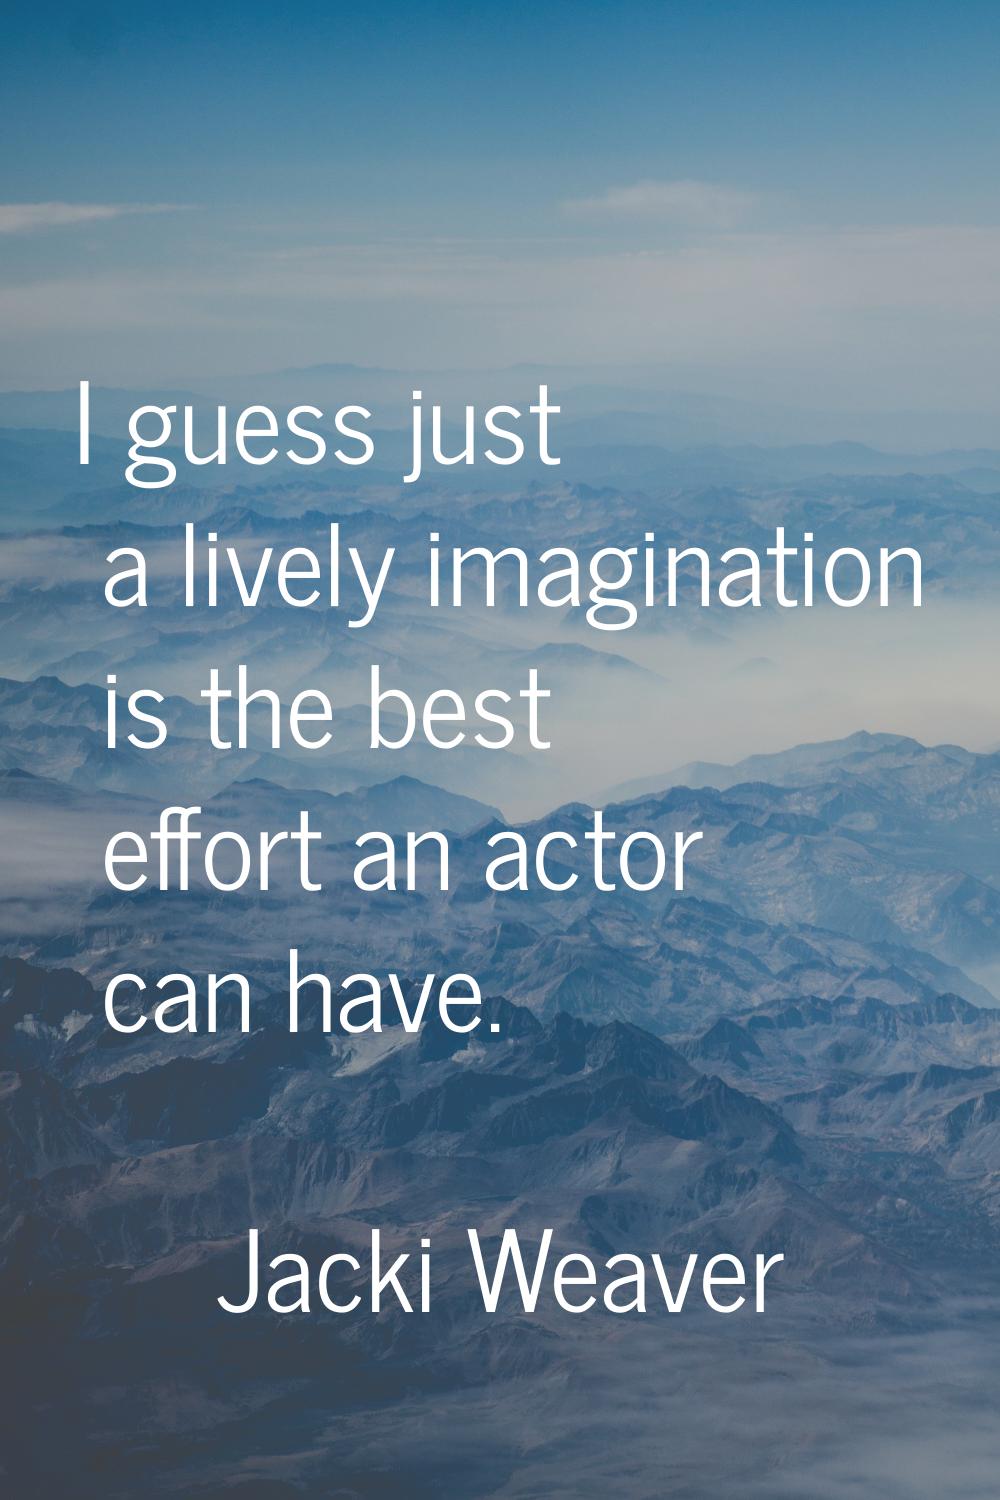 I guess just a lively imagination is the best effort an actor can have.